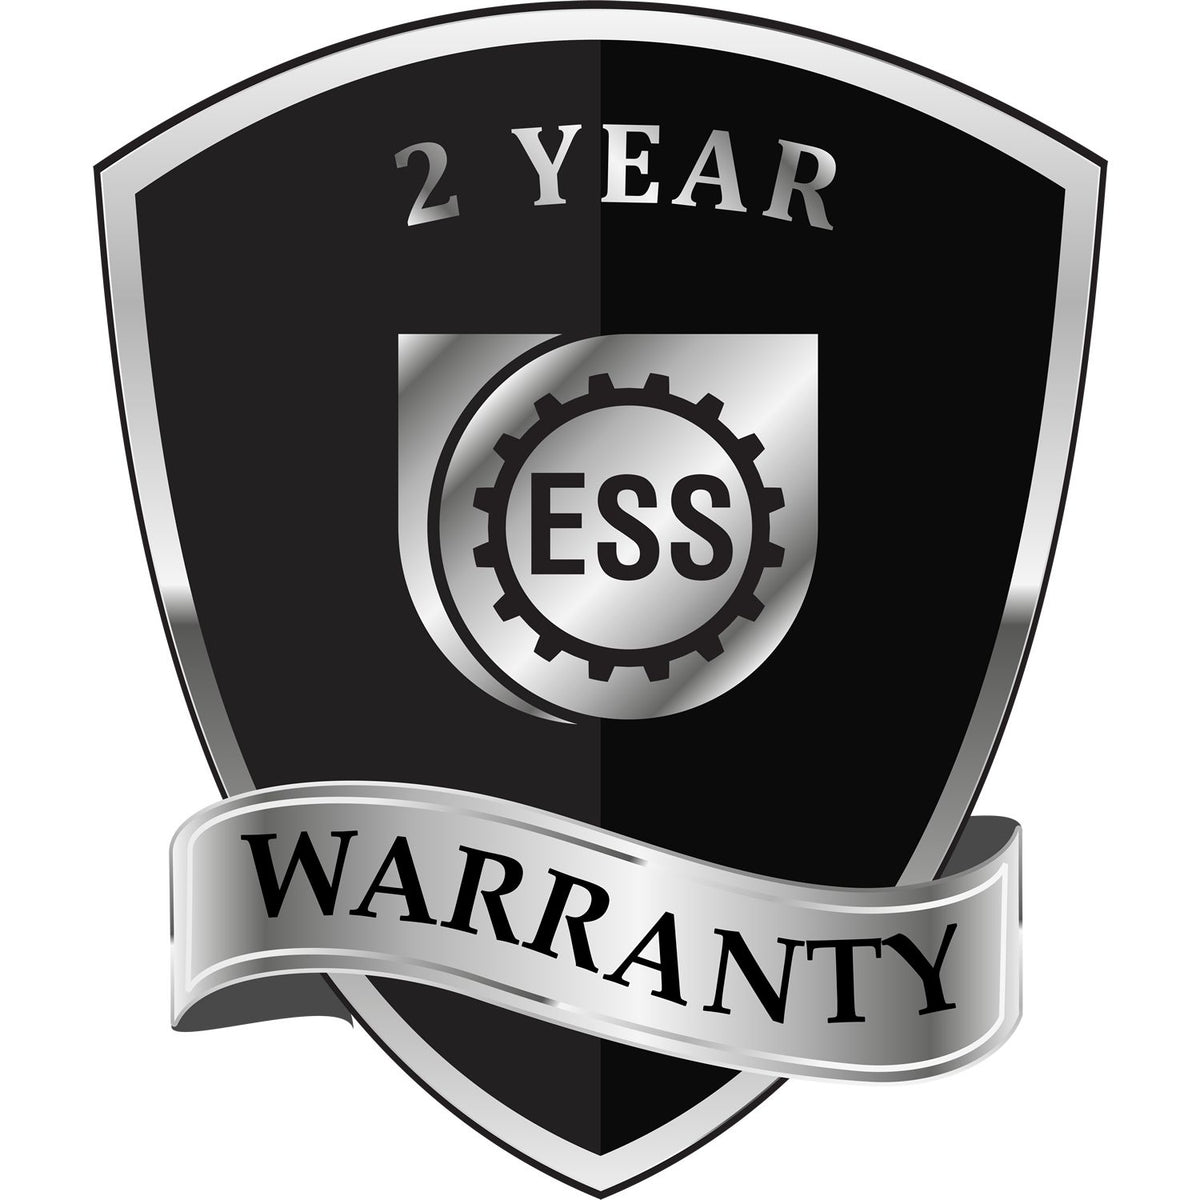 A badge or emblem showing a warranty icon for the Handheld Maine Professional Engineer Embosser